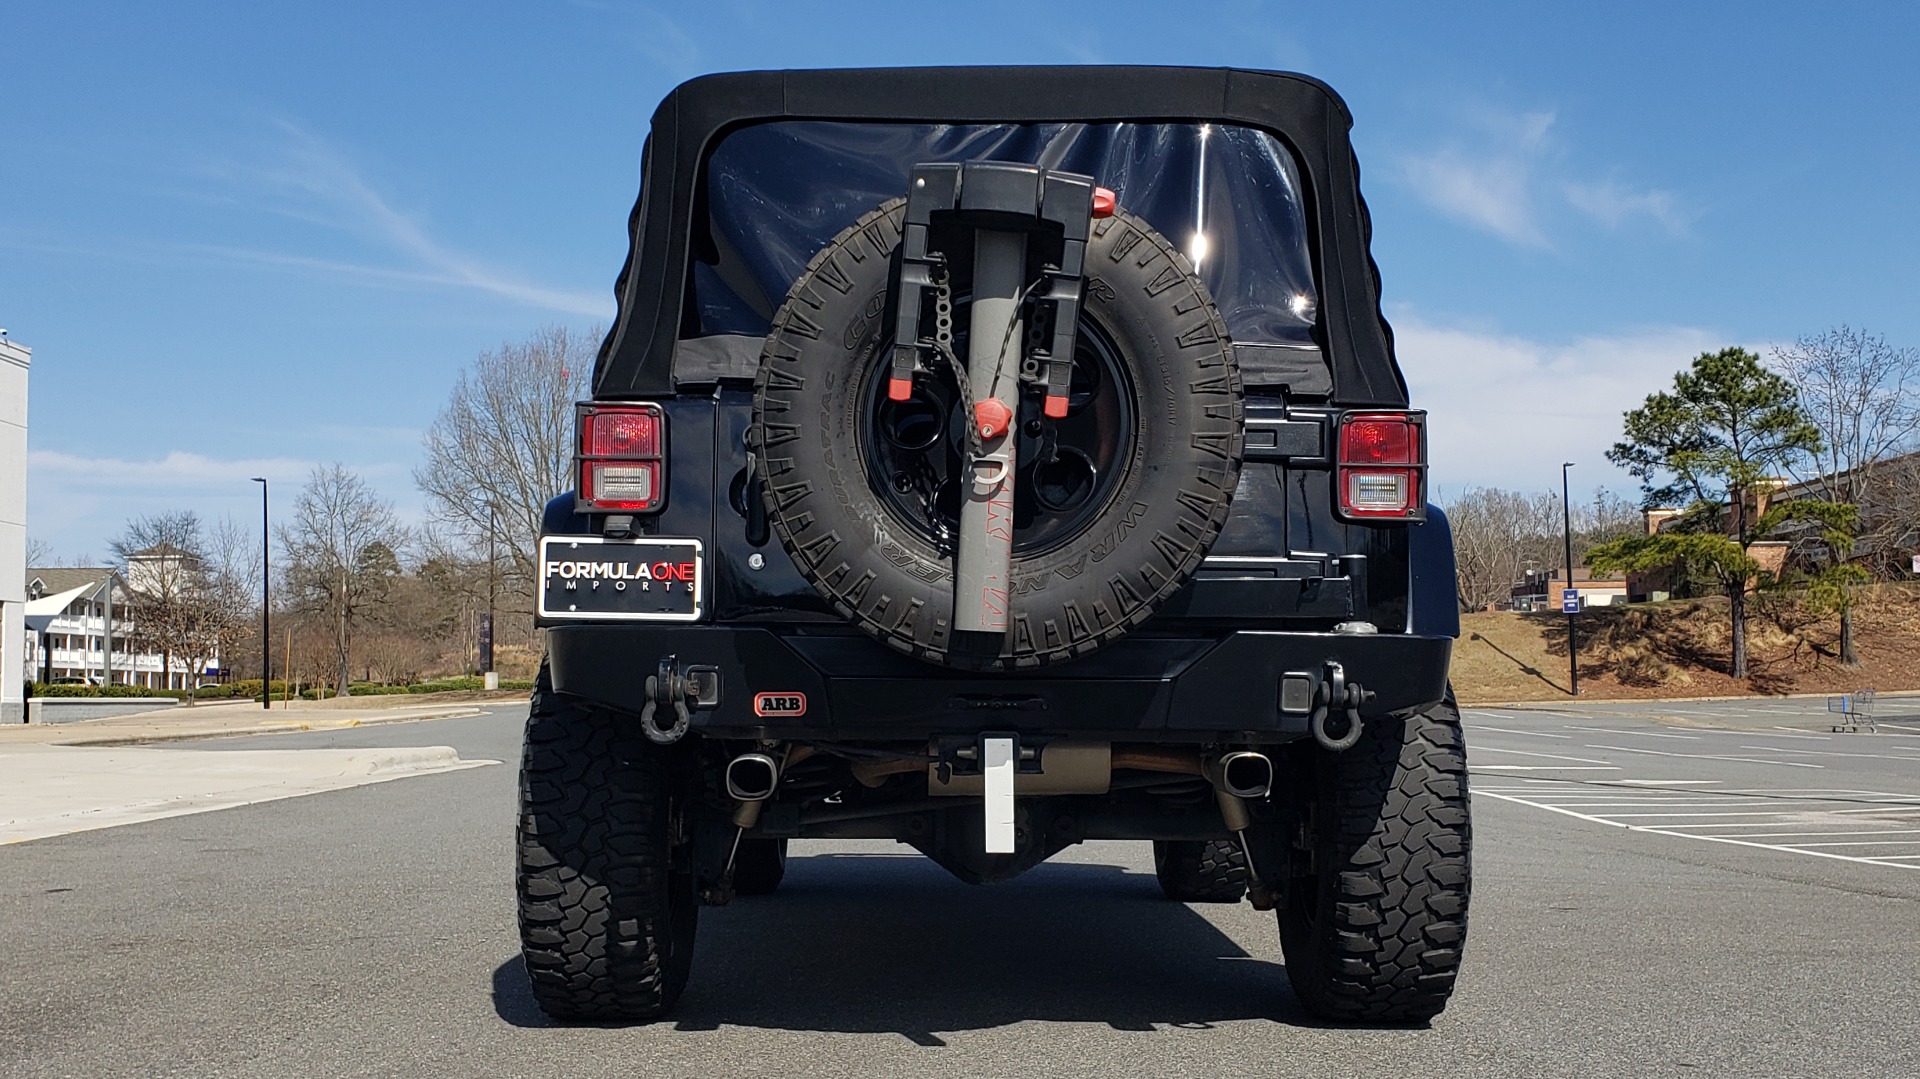 Used 2014 Jeep WRANGLER UNLIMITED SAHARA 4X4 / 3.6L V6 / 5-SPD AUTO / NAV / TOW PKG / SOFT-TOP for sale Sold at Formula Imports in Charlotte NC 28227 31